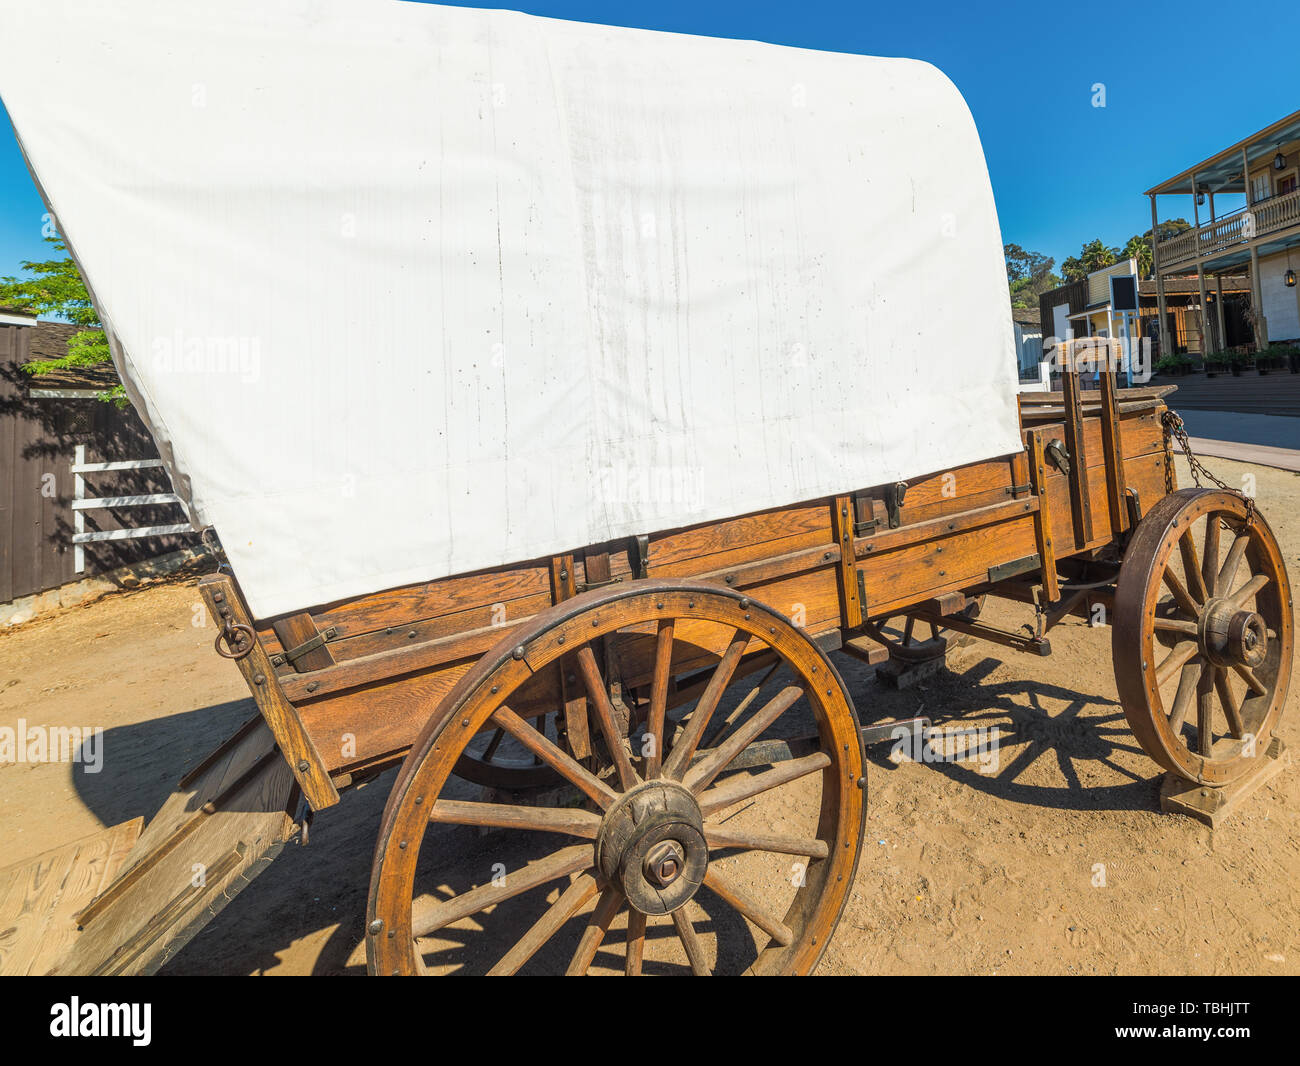 Wild west cart in old town San Diego. California, USA Stock Photo